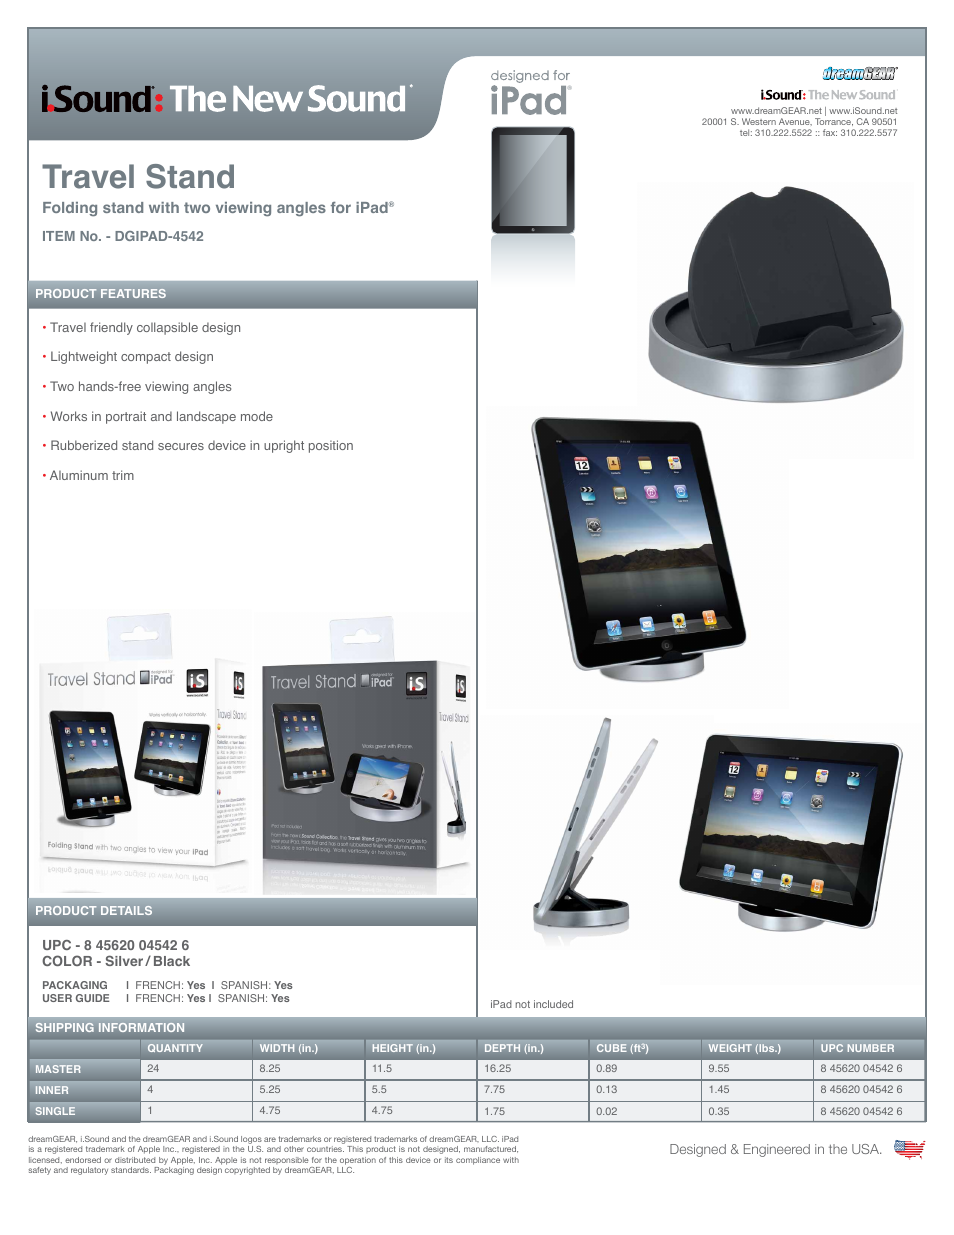 Travel Stand for iPad - Sell Sheet